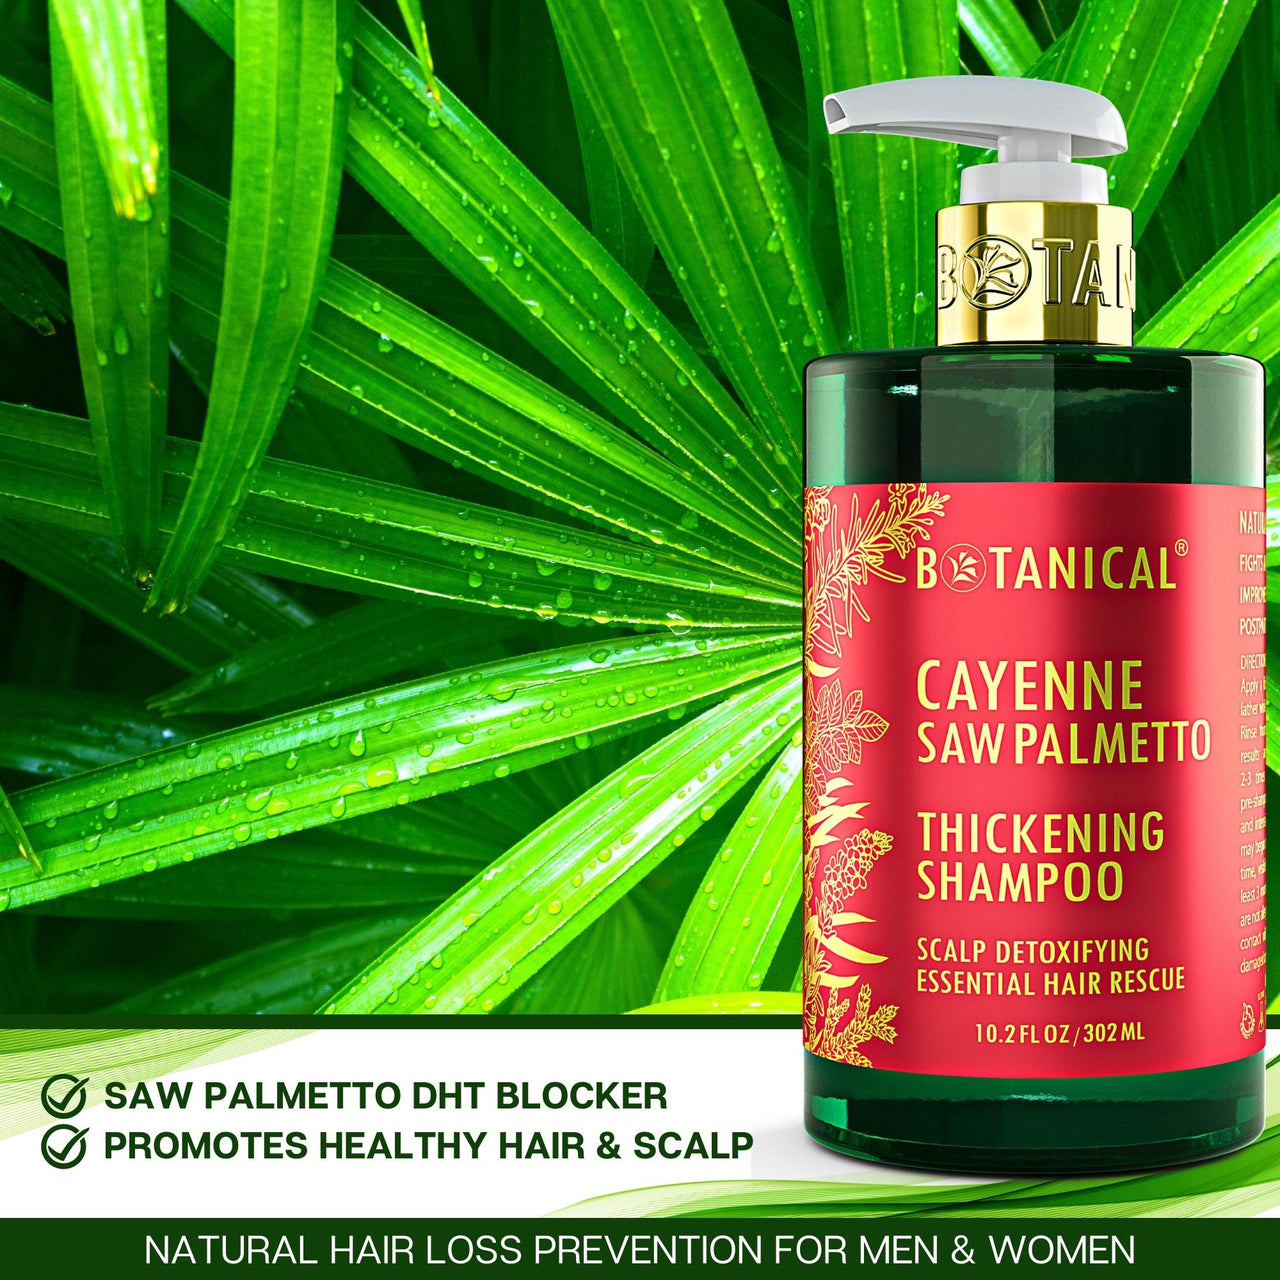 Cayenne Saw Palmetto shampoo for hair thinning prevention